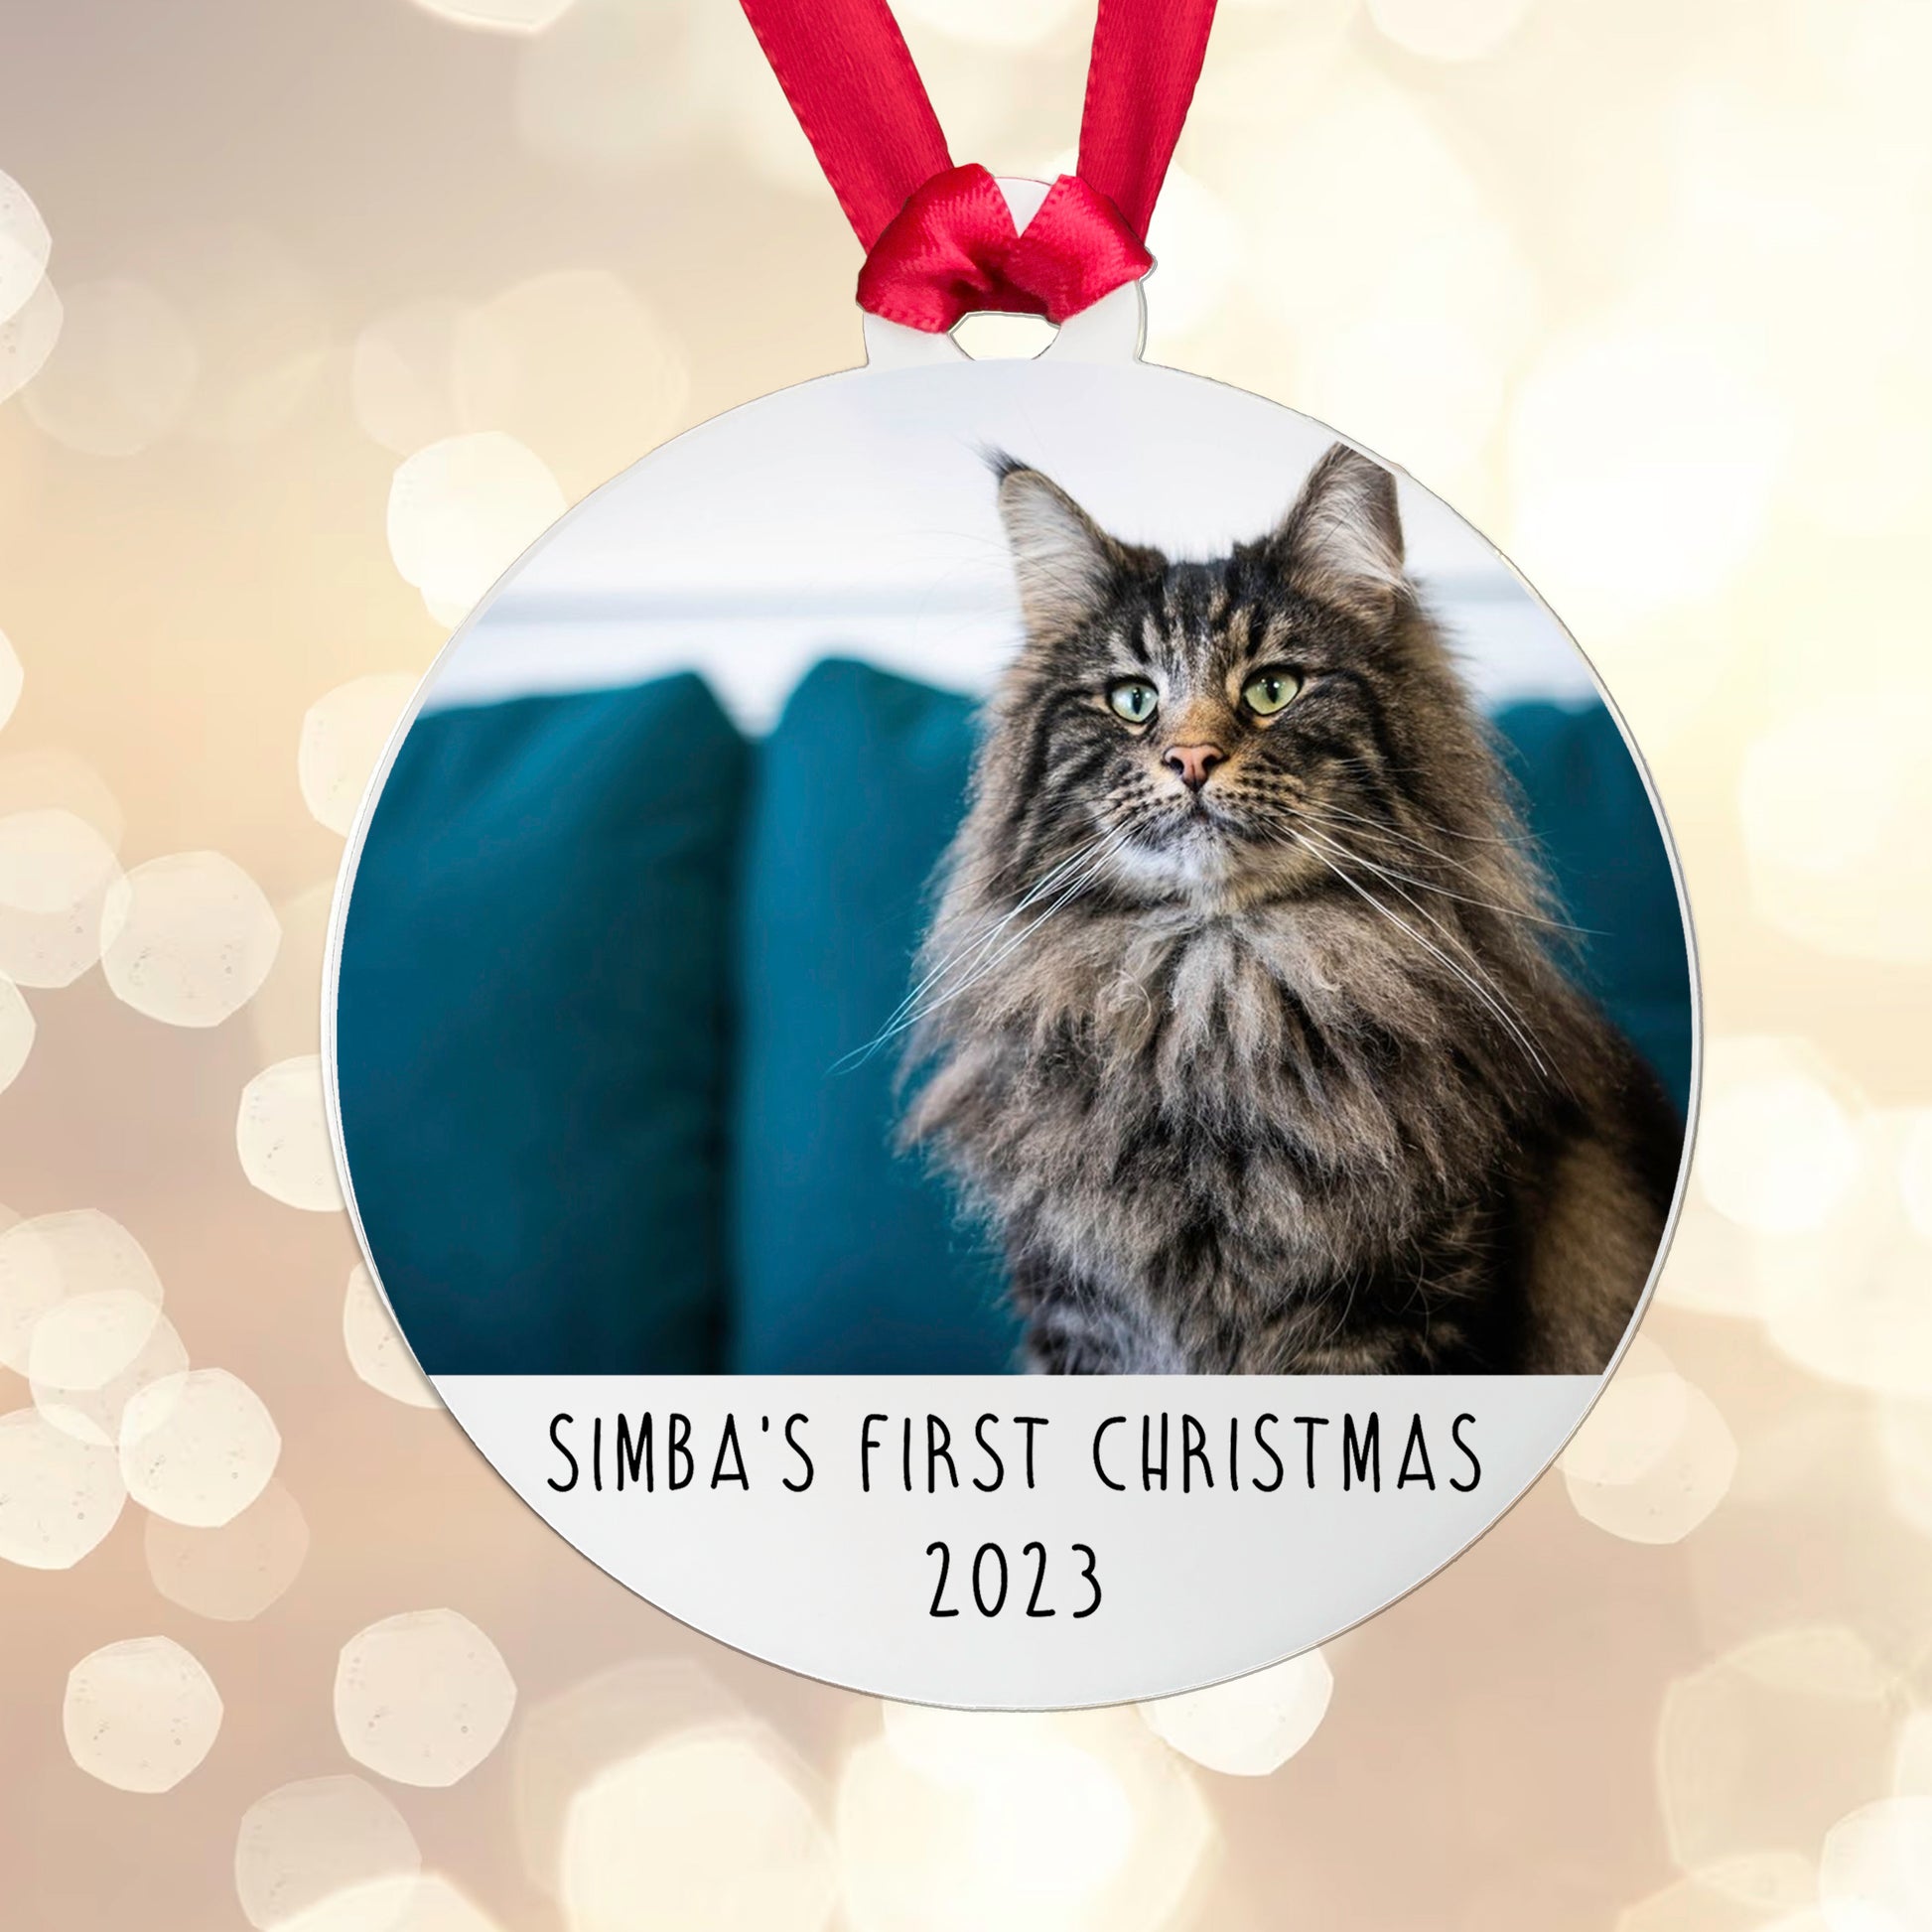 Personalised Cat's First Christmas Photo Bauble - Acrylic